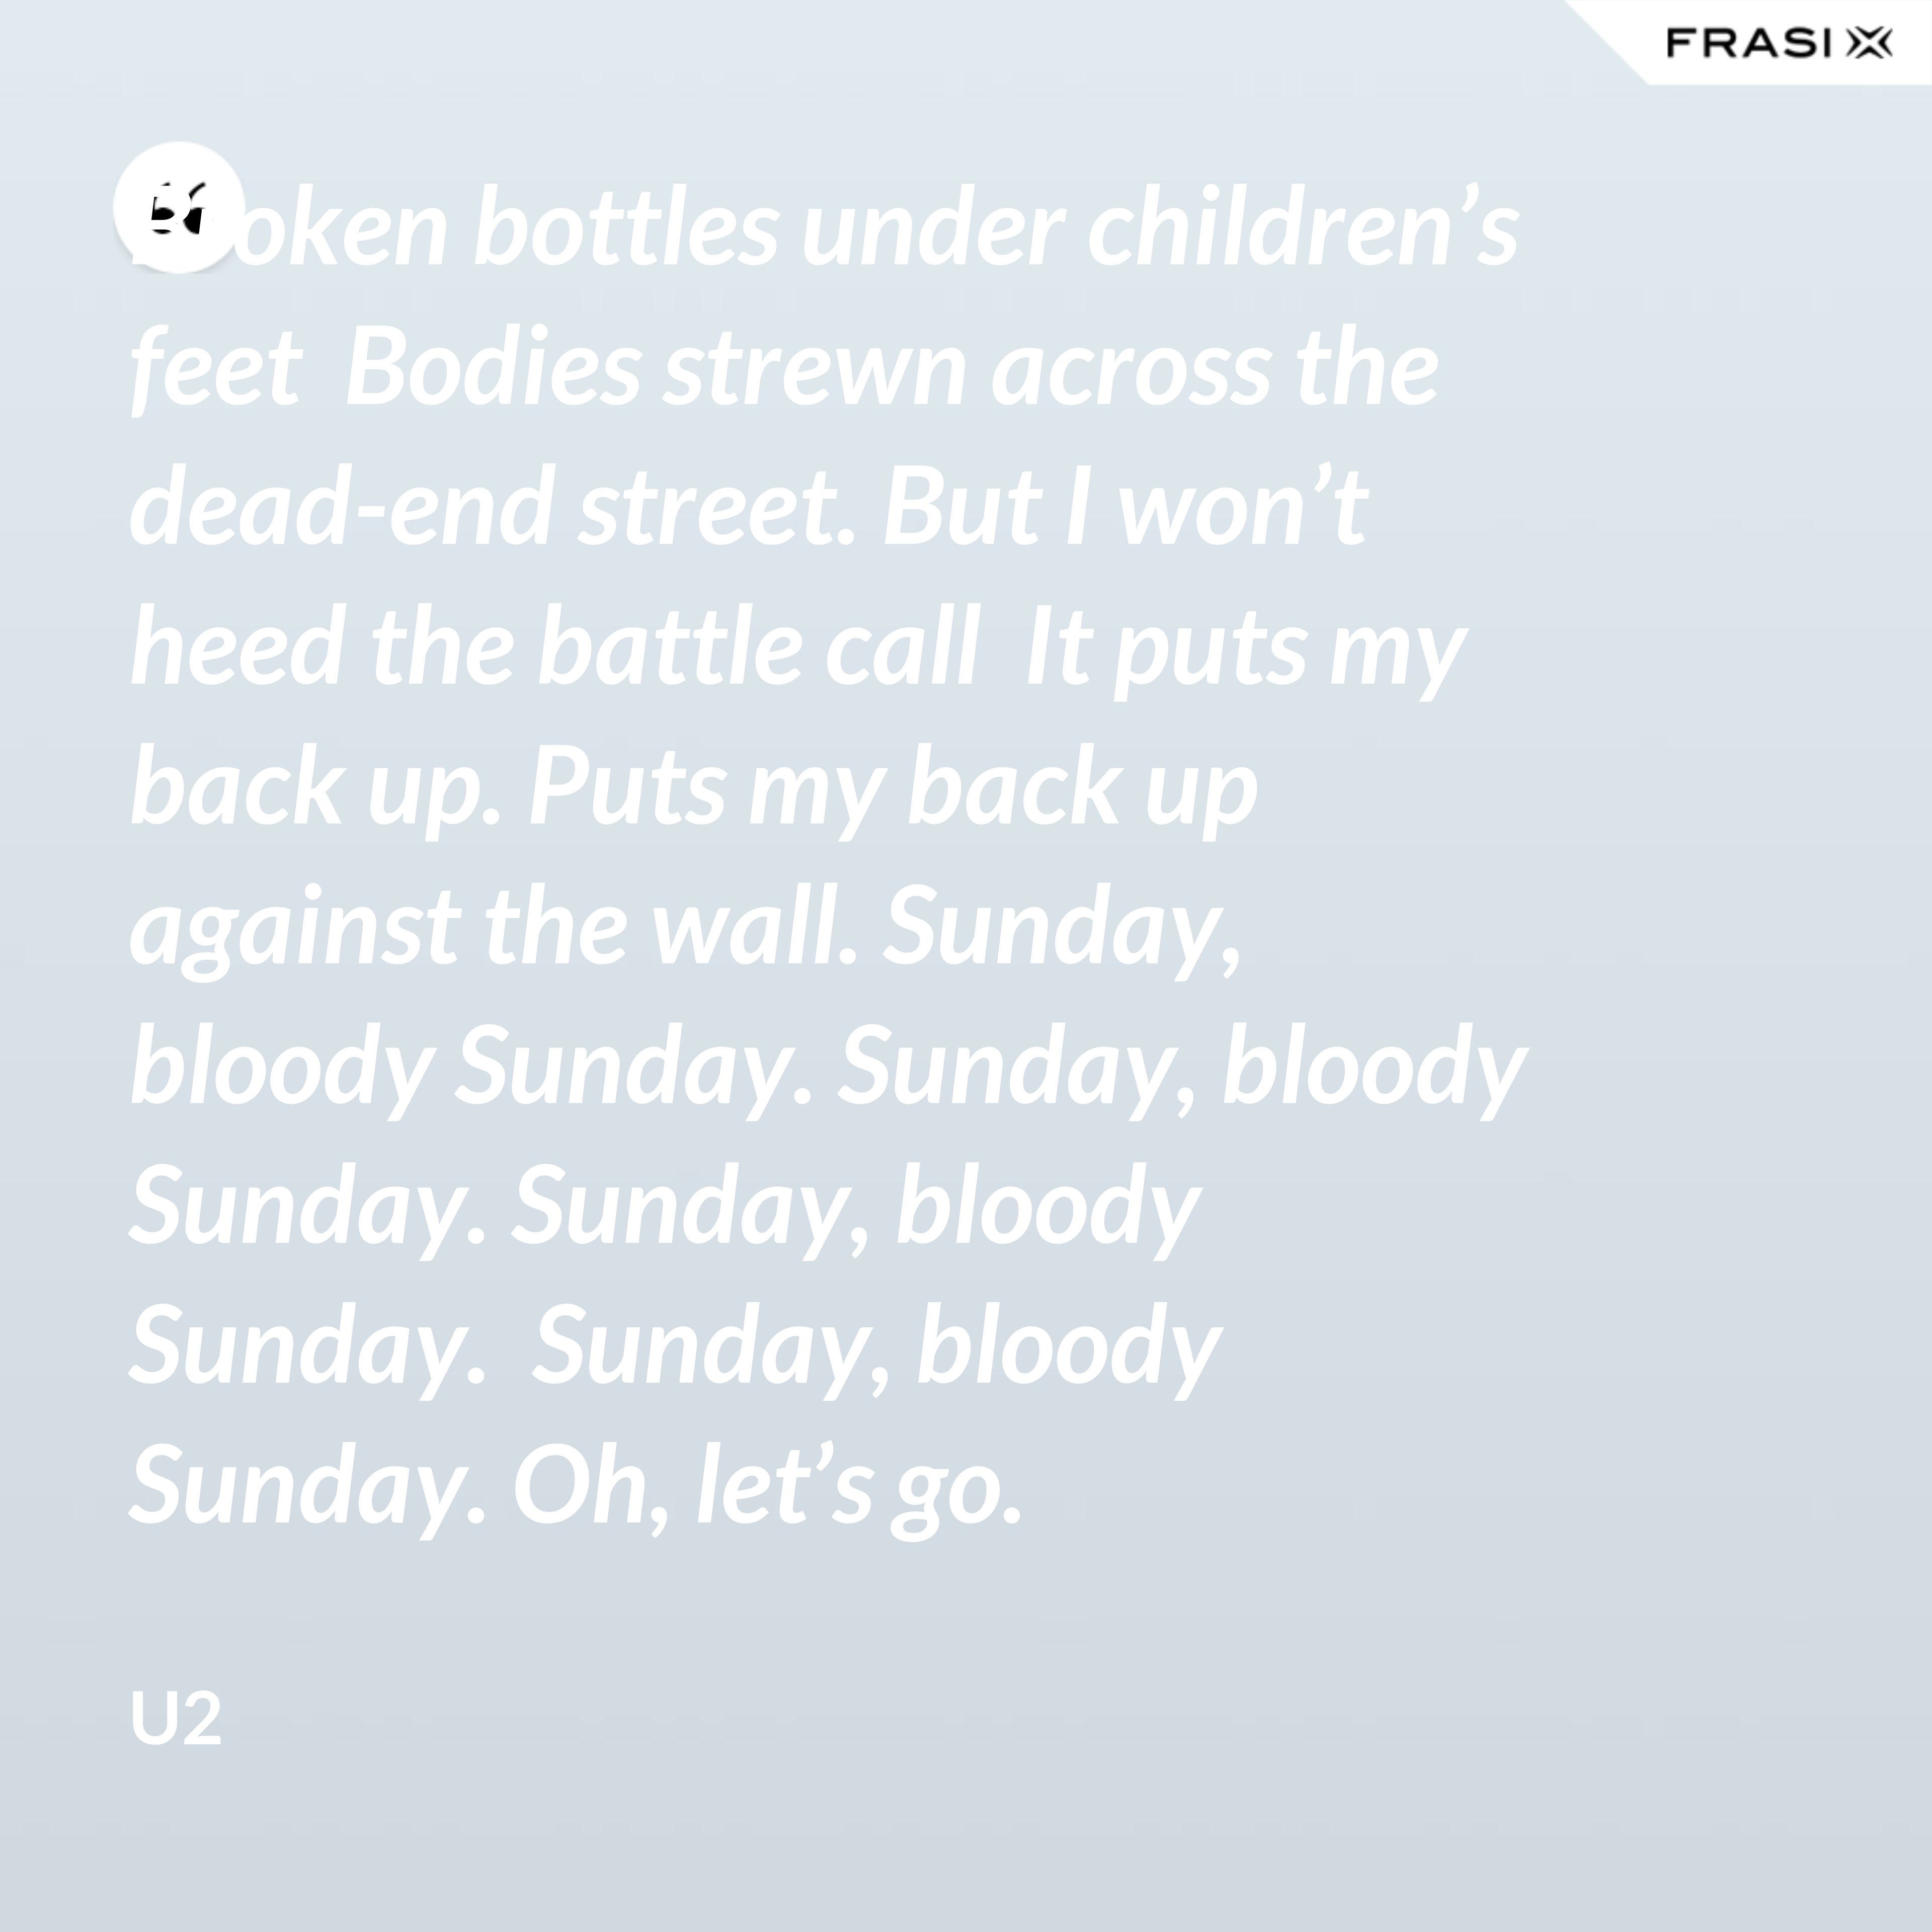 Broken bottles under children’s feet  Bodies strewn across the dead-end street. But I won’t heed the battle call  It puts my back up. Puts my back up against the wall. Sunday, bloody Sunday. Sunday, bloody Sunday. Sunday, bloody Sunday.  Sunday, bloody Sunday. Oh, let’s go. - U2